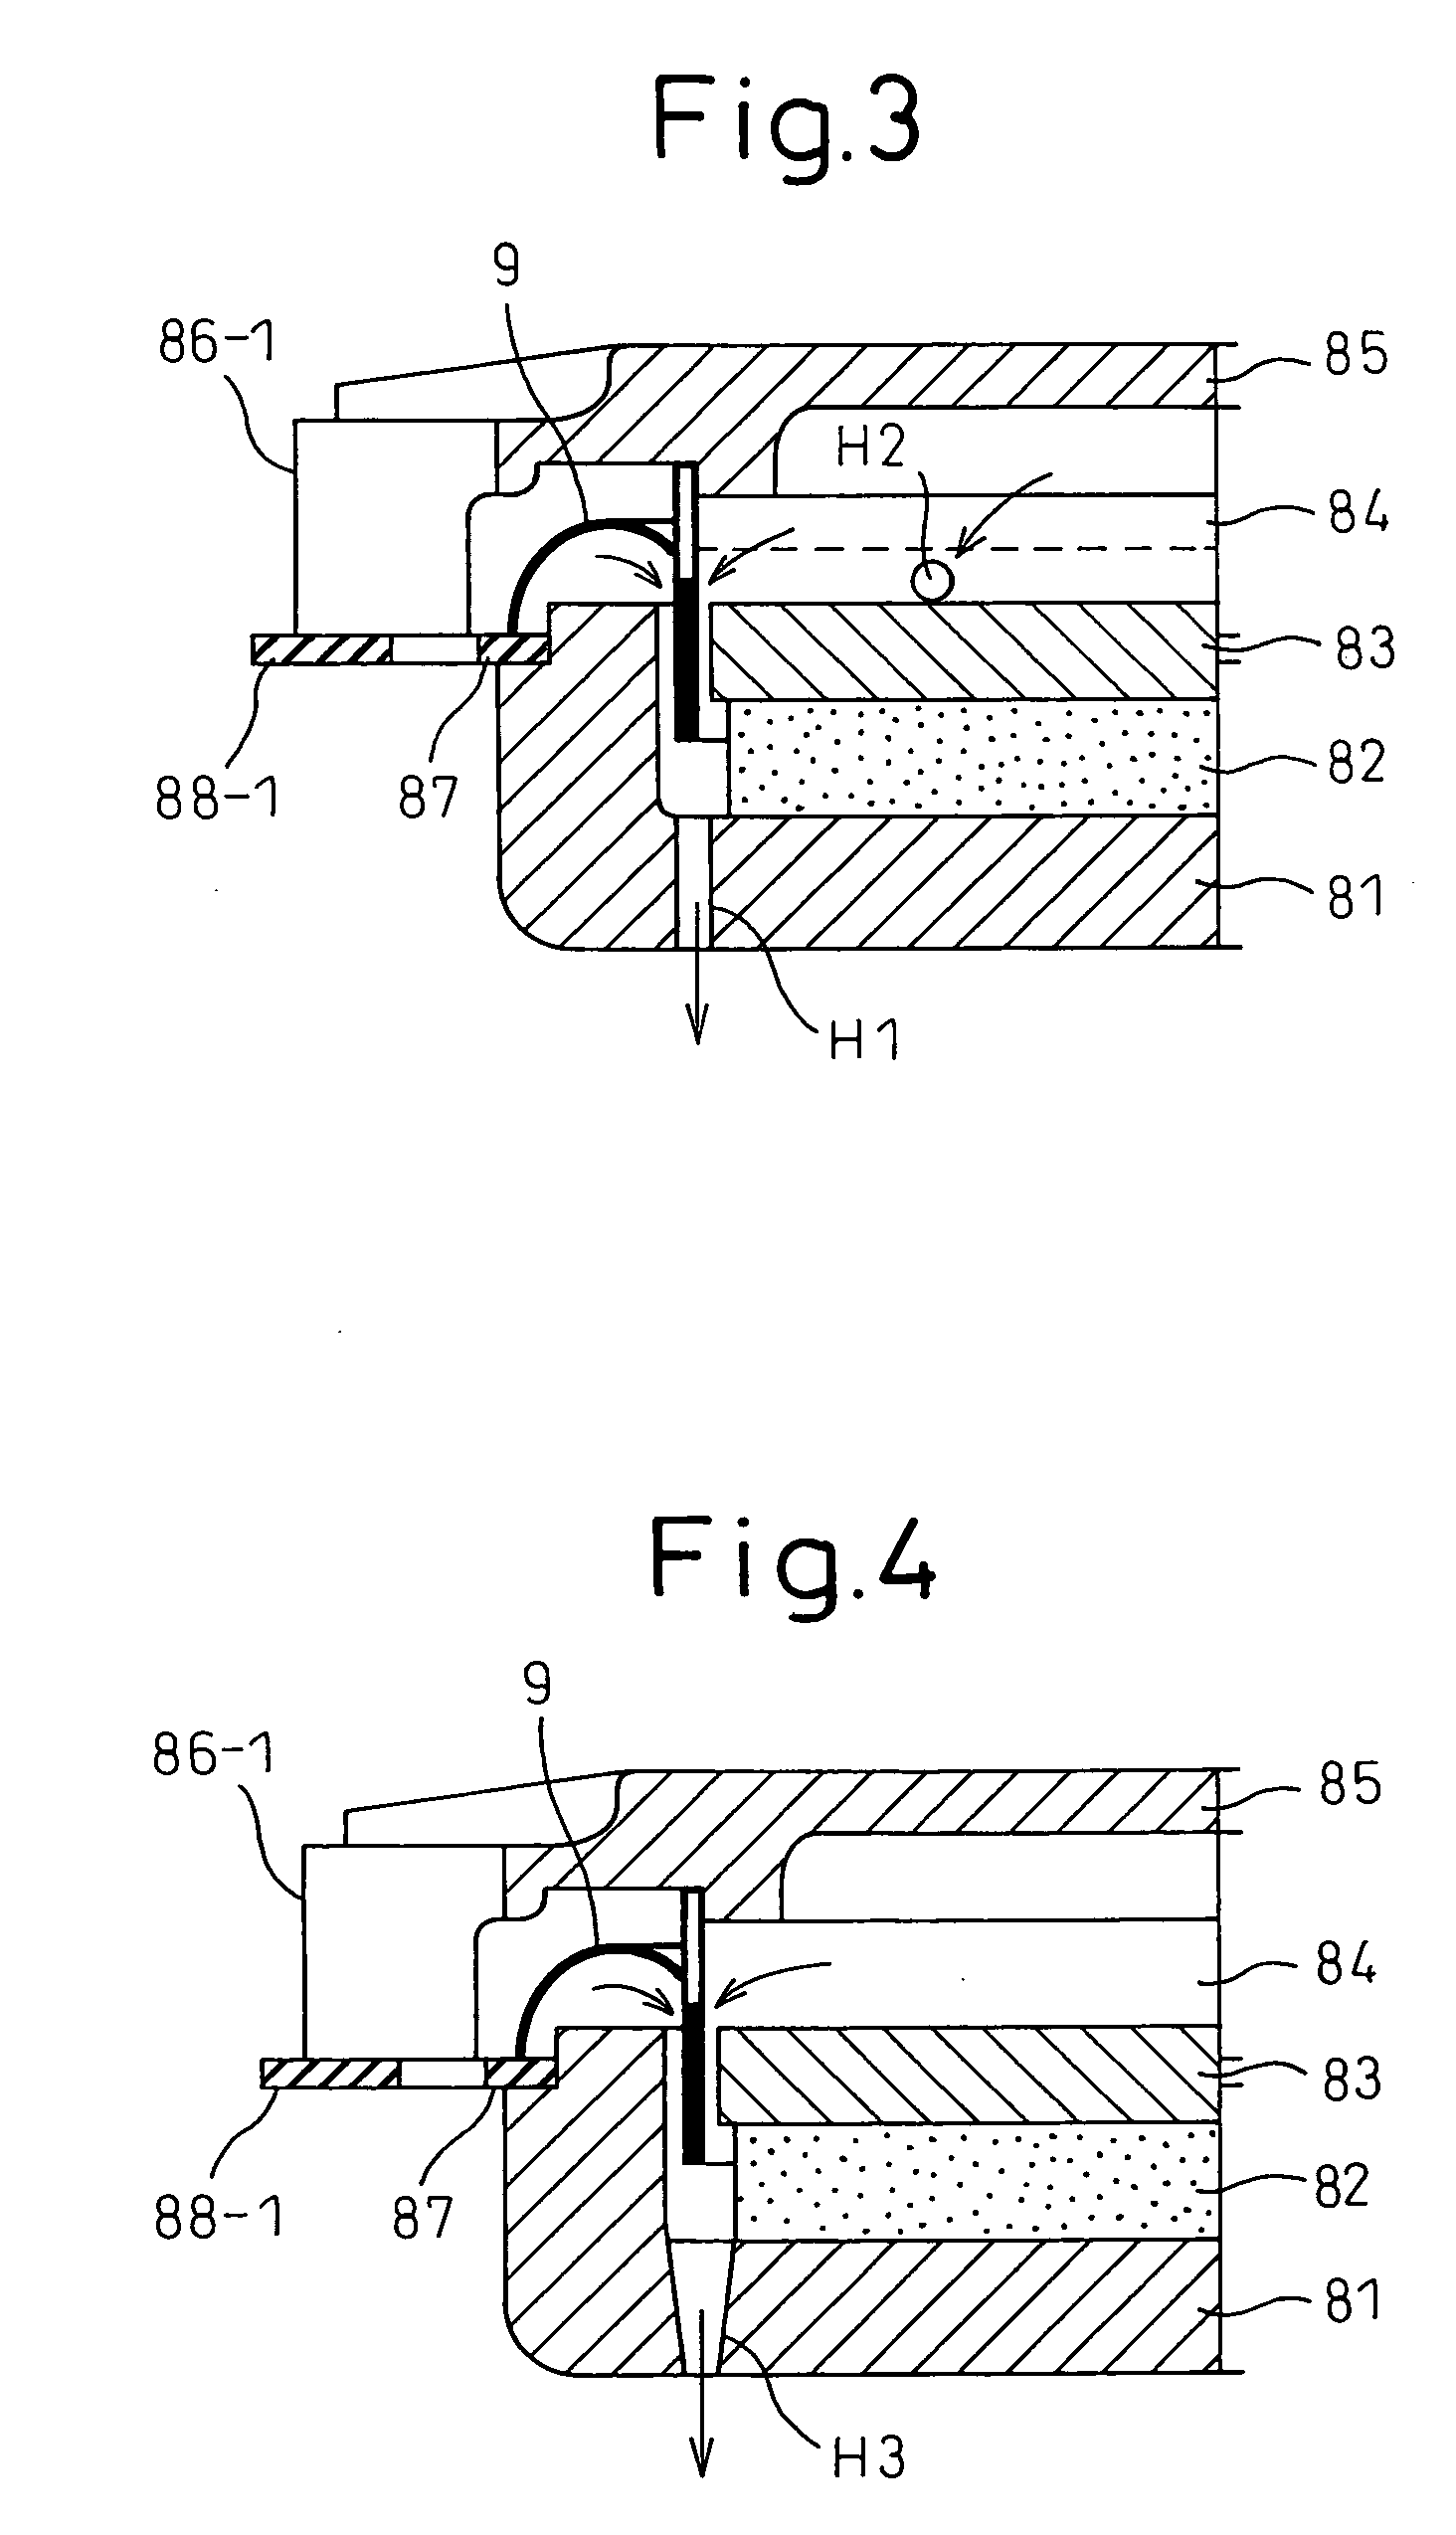 Exciter for directly vibrating board and speaker apparatus used the same